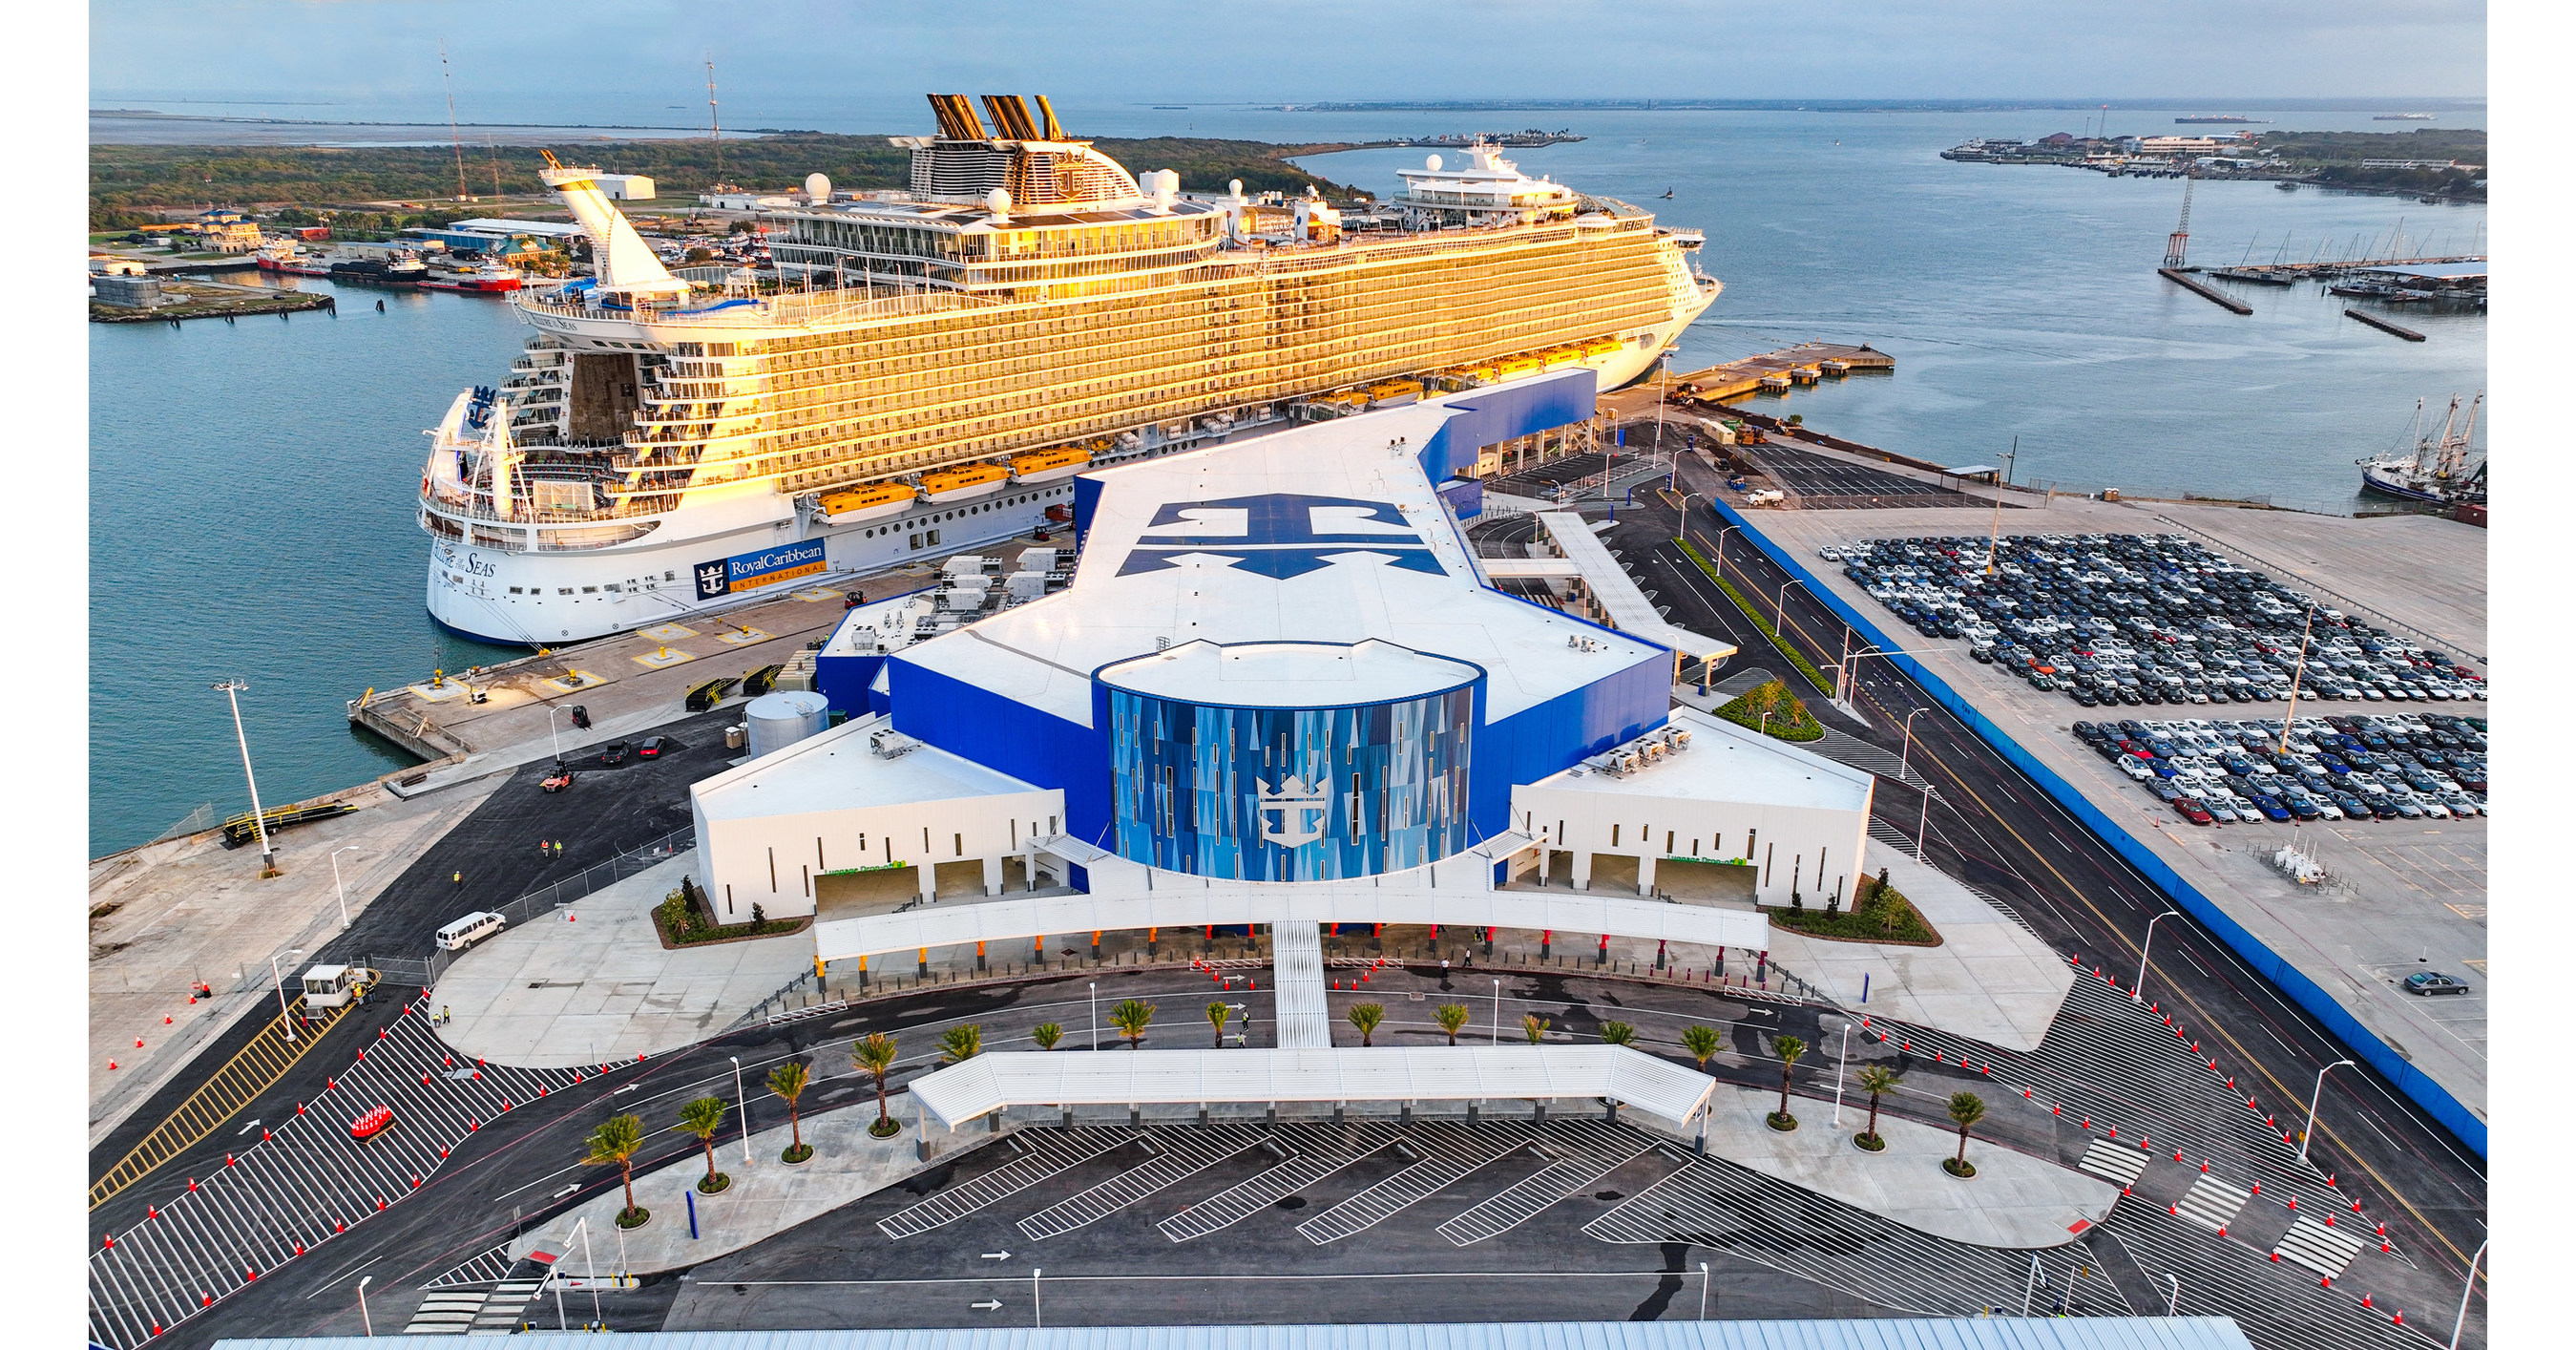 NEW ROYAL CARIBBEAN TERMINAL OPENS, WELCOMING LARGEST CRUISE SHIP AND THE BEST FAMILY VACATIONS IN TEXAS